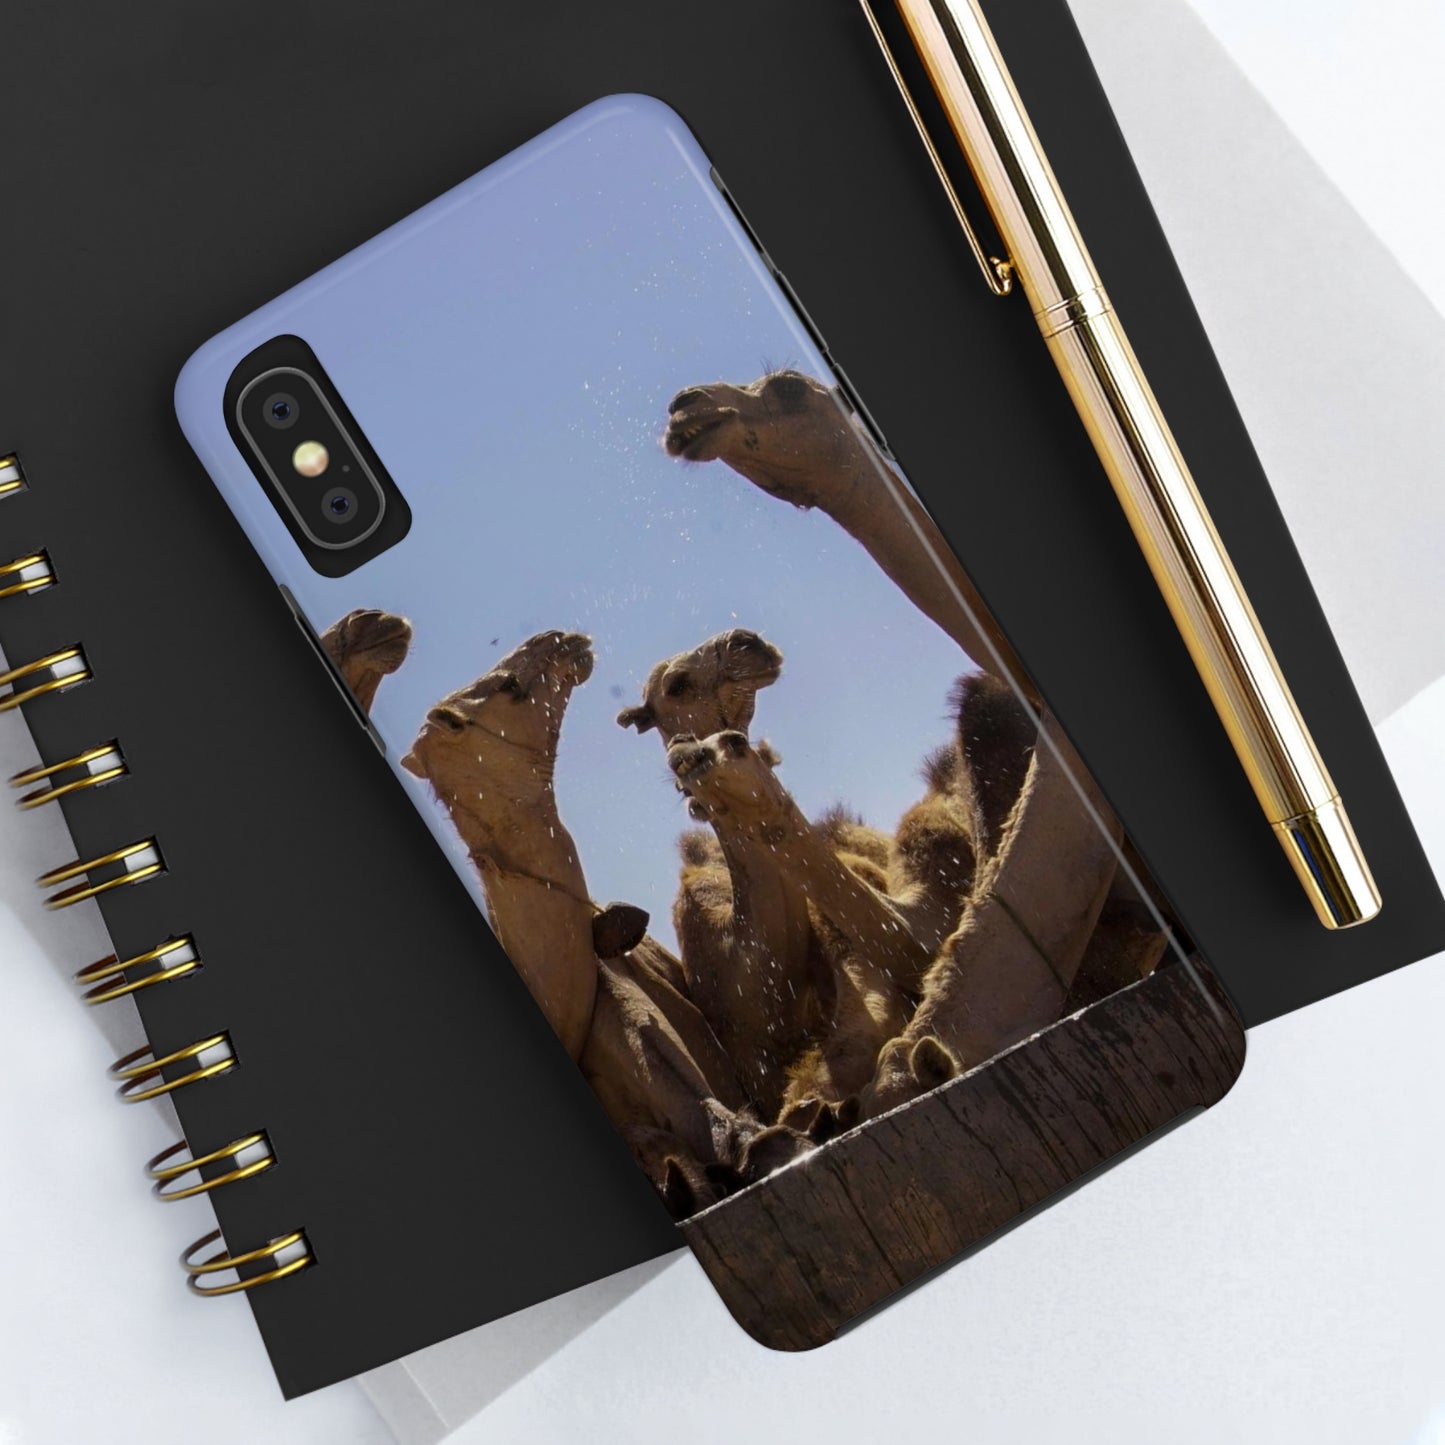 Tough iPhone Cases - Camels by Abdilaahi Persia